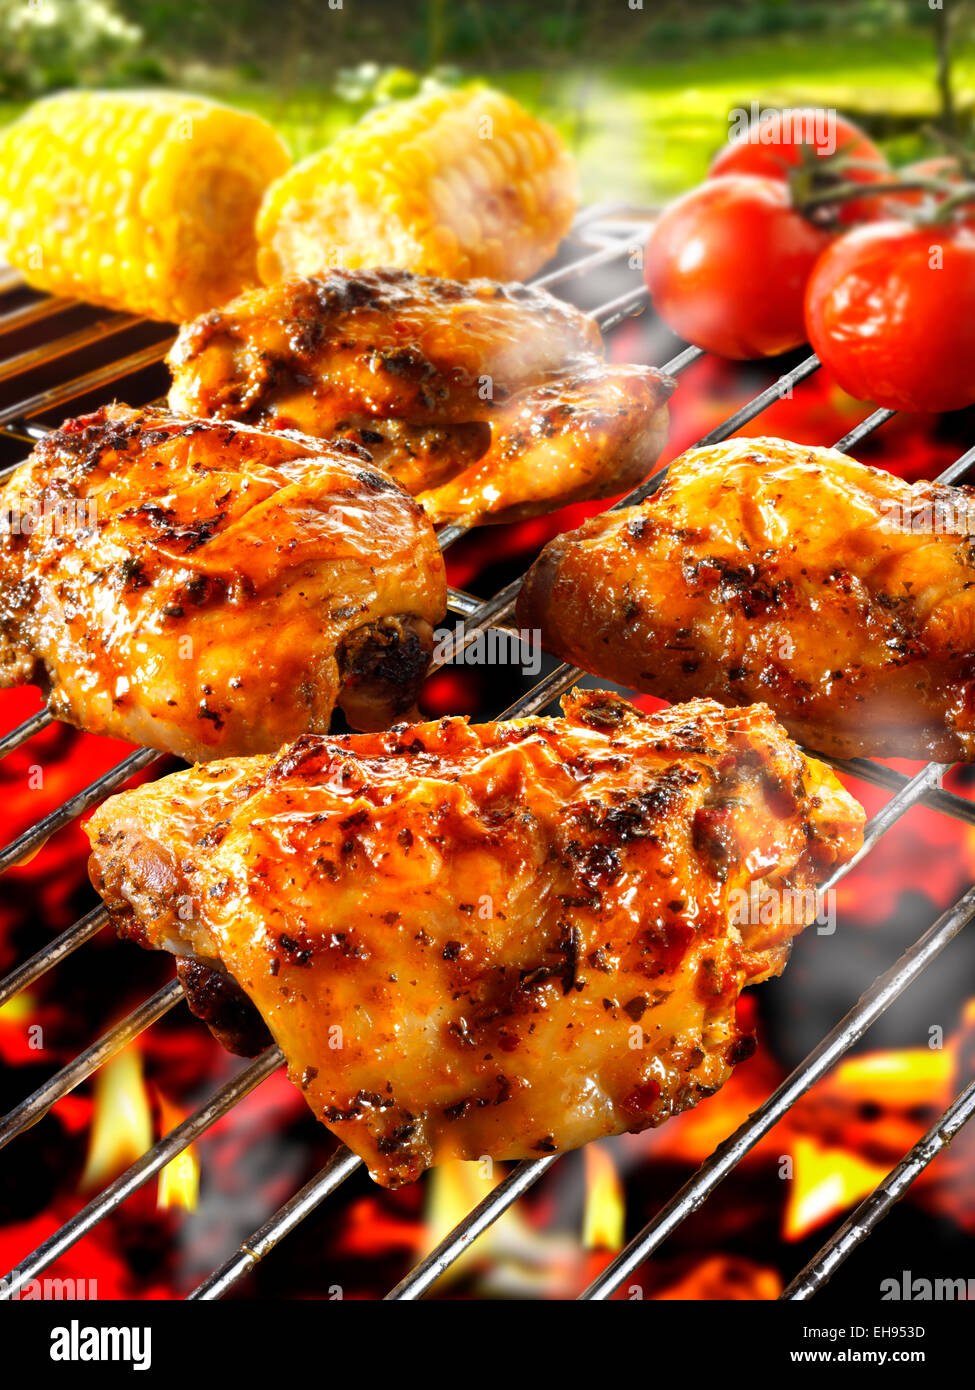 Barbecue chicken pieces cooking on a bbq over flames Stock Photo